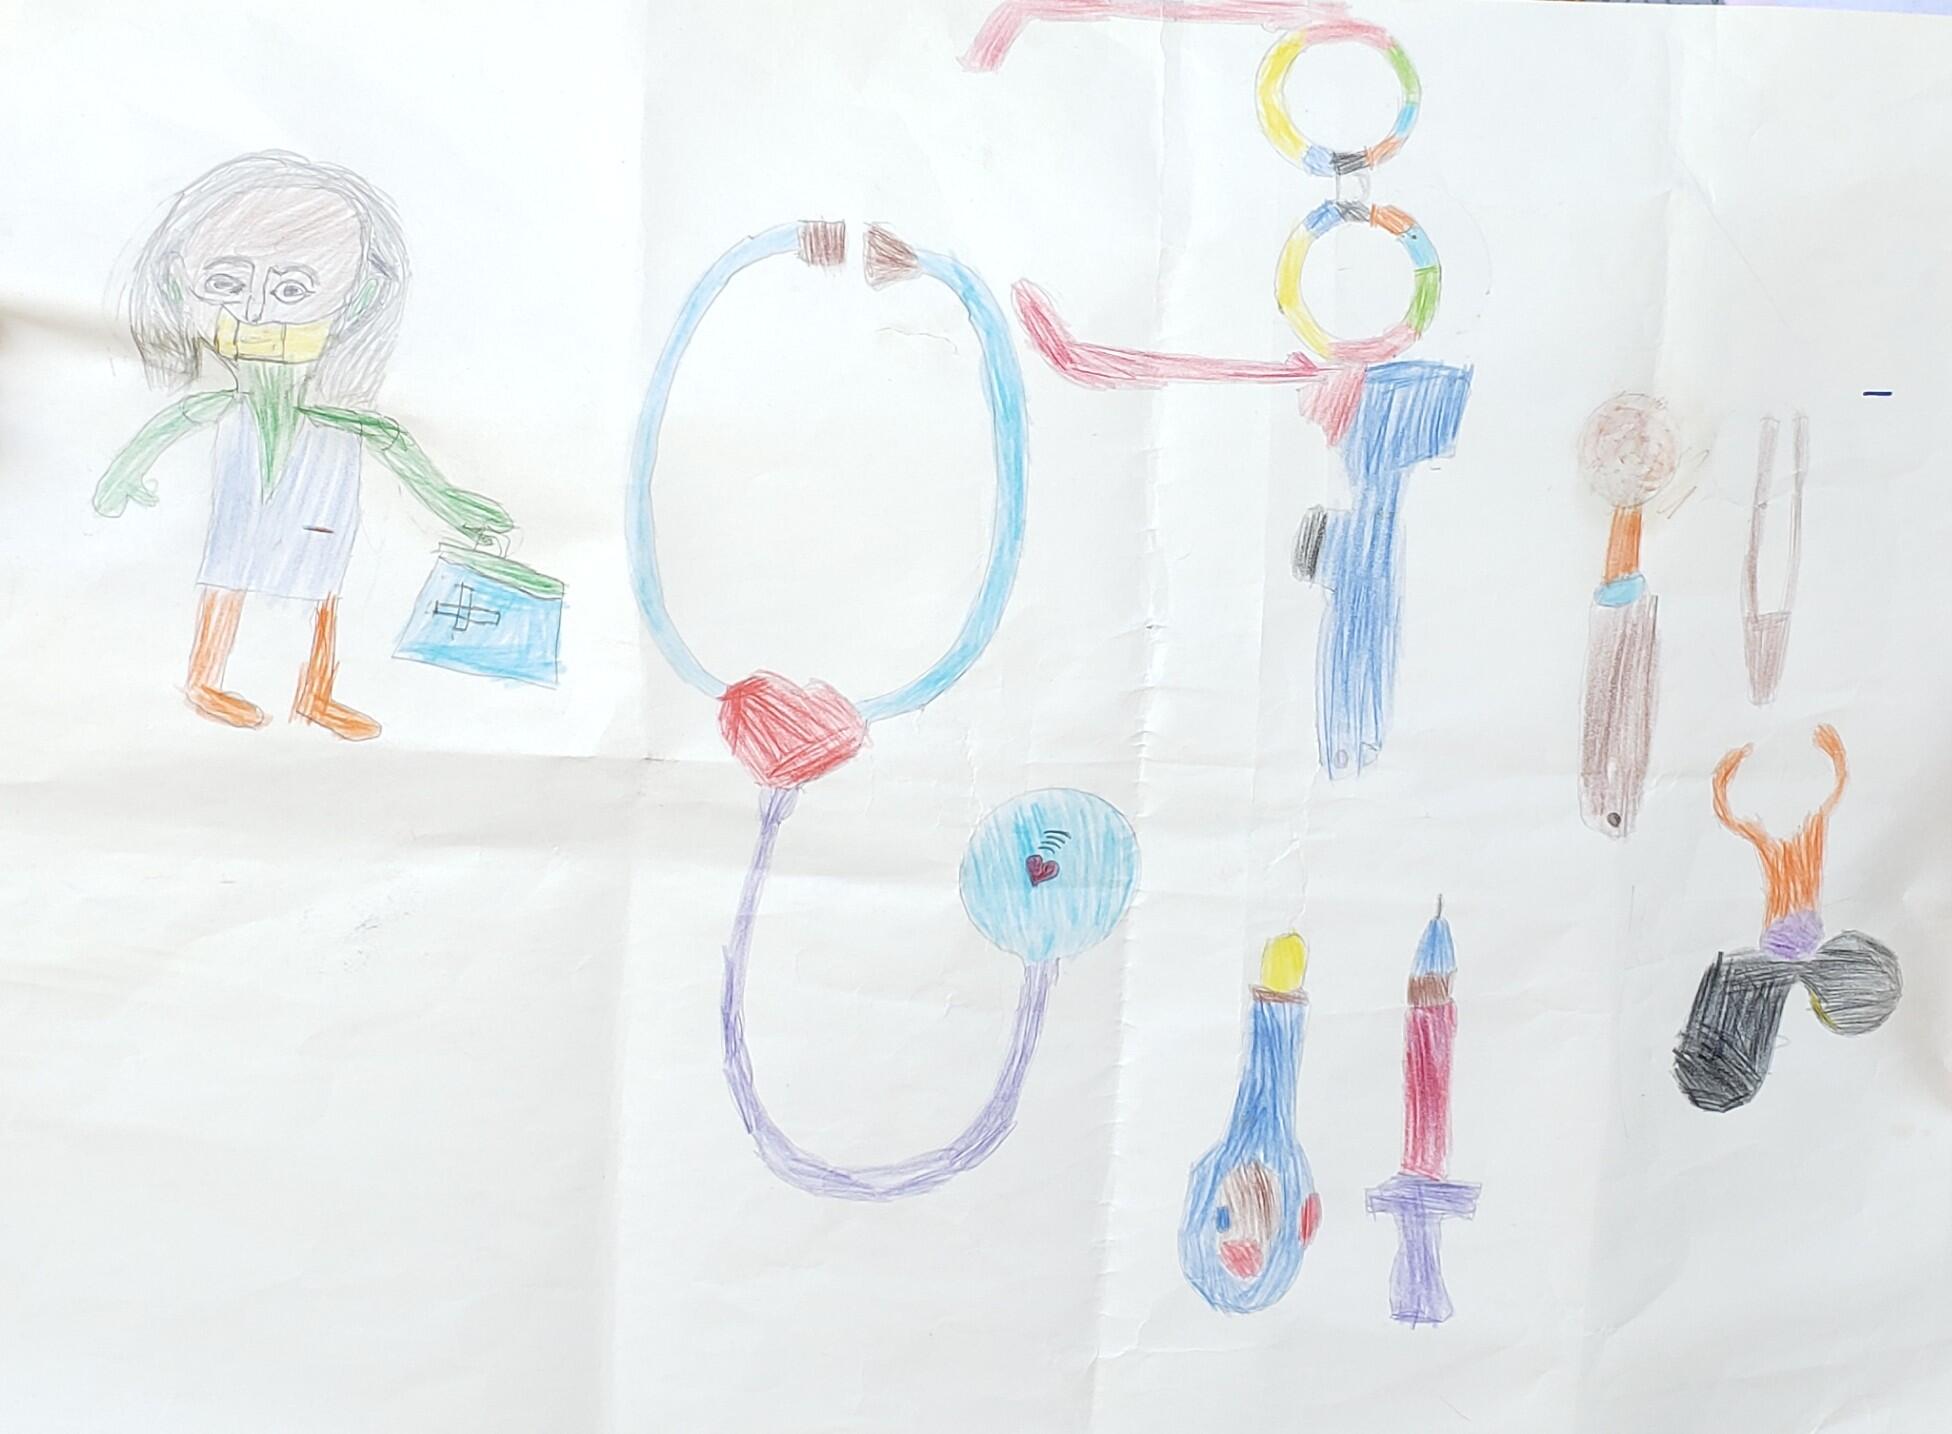 Eight-year-old Delina's drawing of a doctor and her instruments, including a stethoscope and a syringe